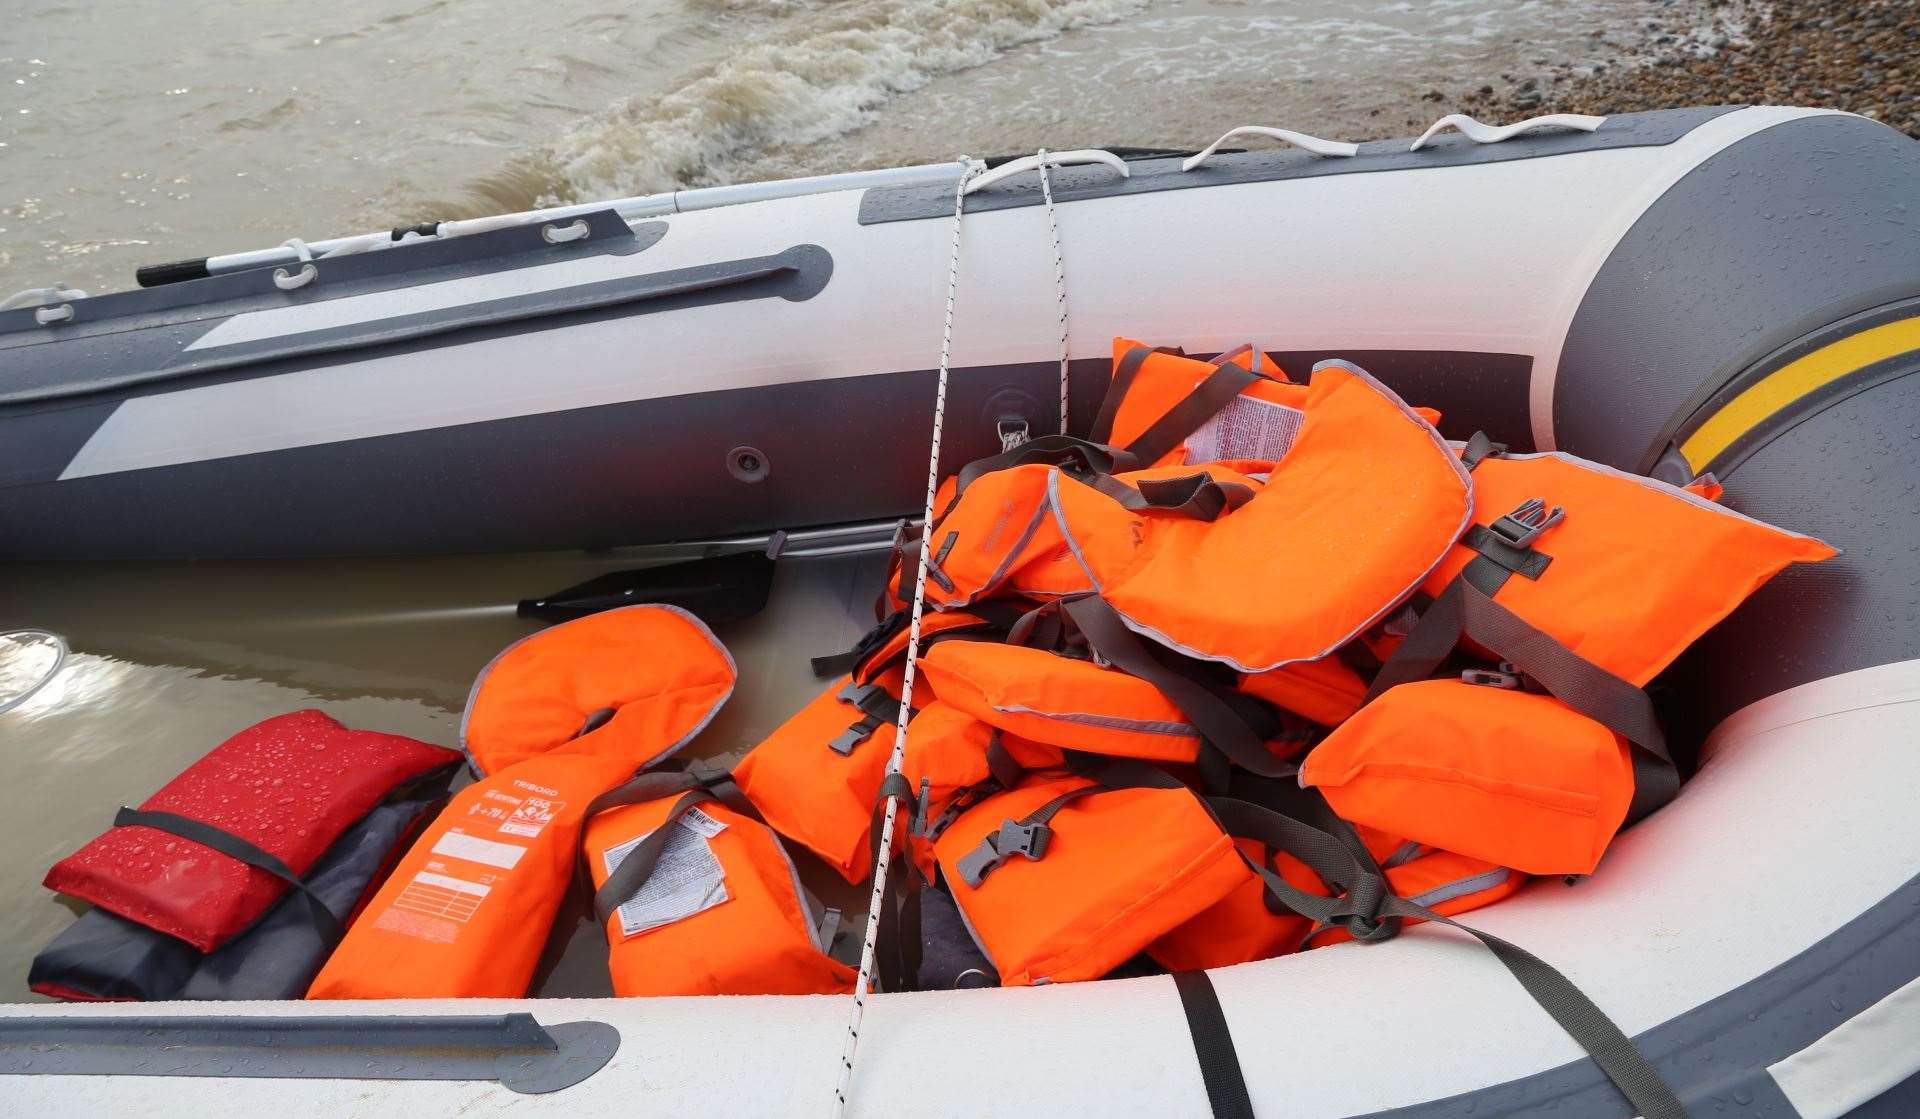 Asylum seekers often use dinghies to get to the UK. Picture: Susan Pilcher